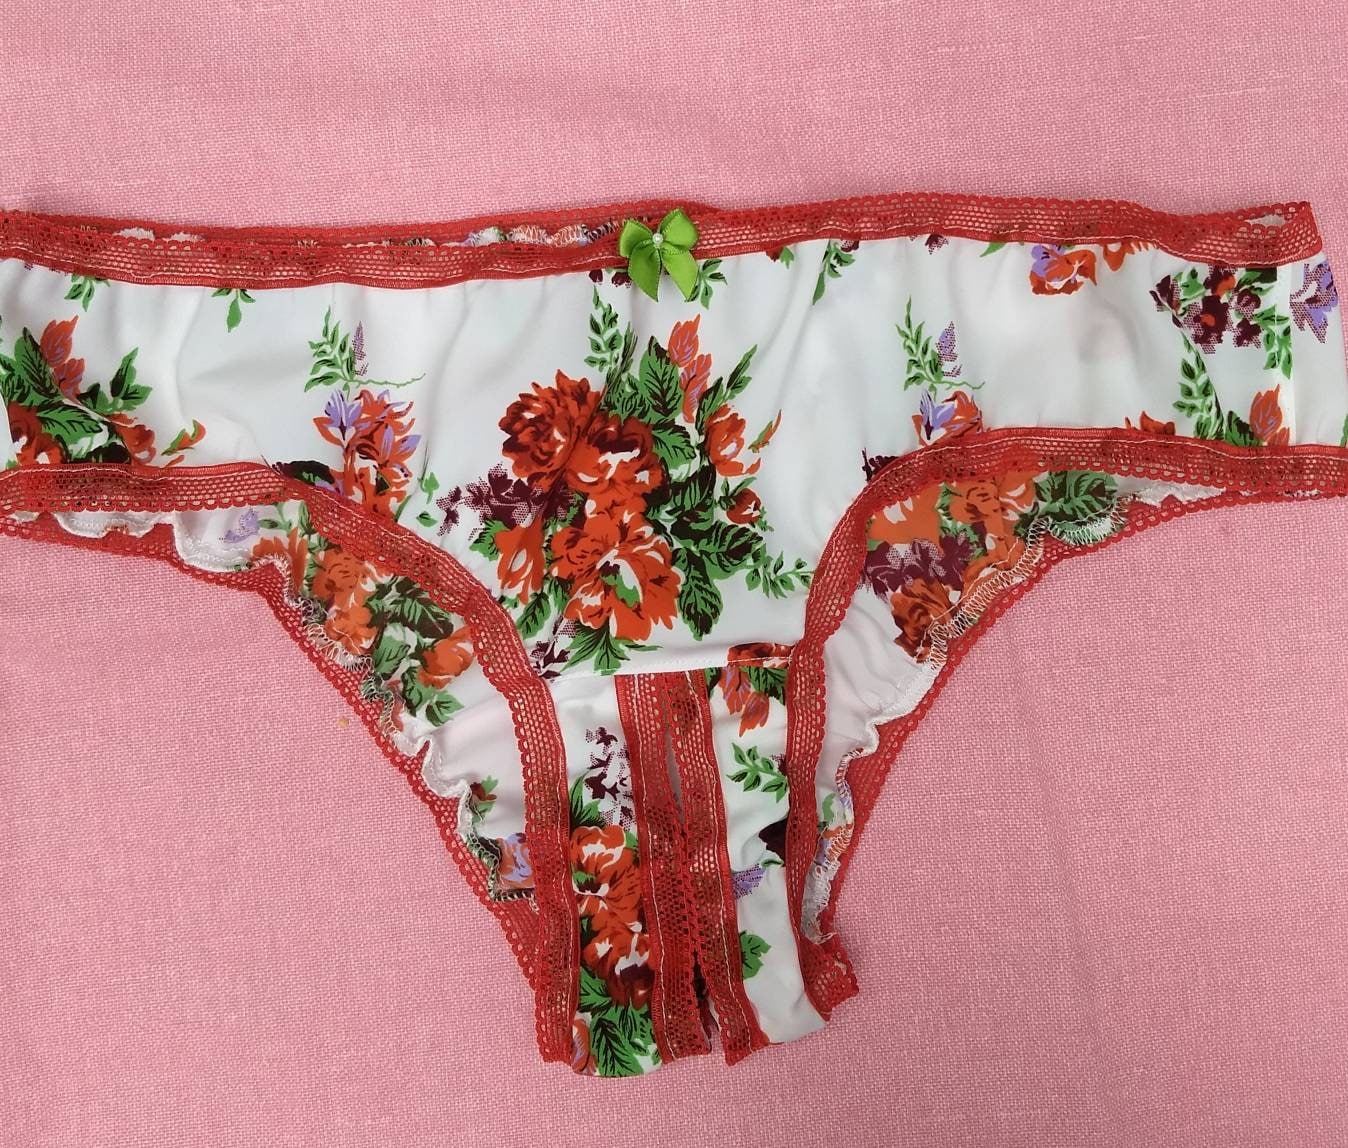 Buy 24FAM Presents-Womens Sexy Underwear, Satin Panties Silky Lace Underwear  Hipster Cheeky Panty Pack of 2-L Assorted at